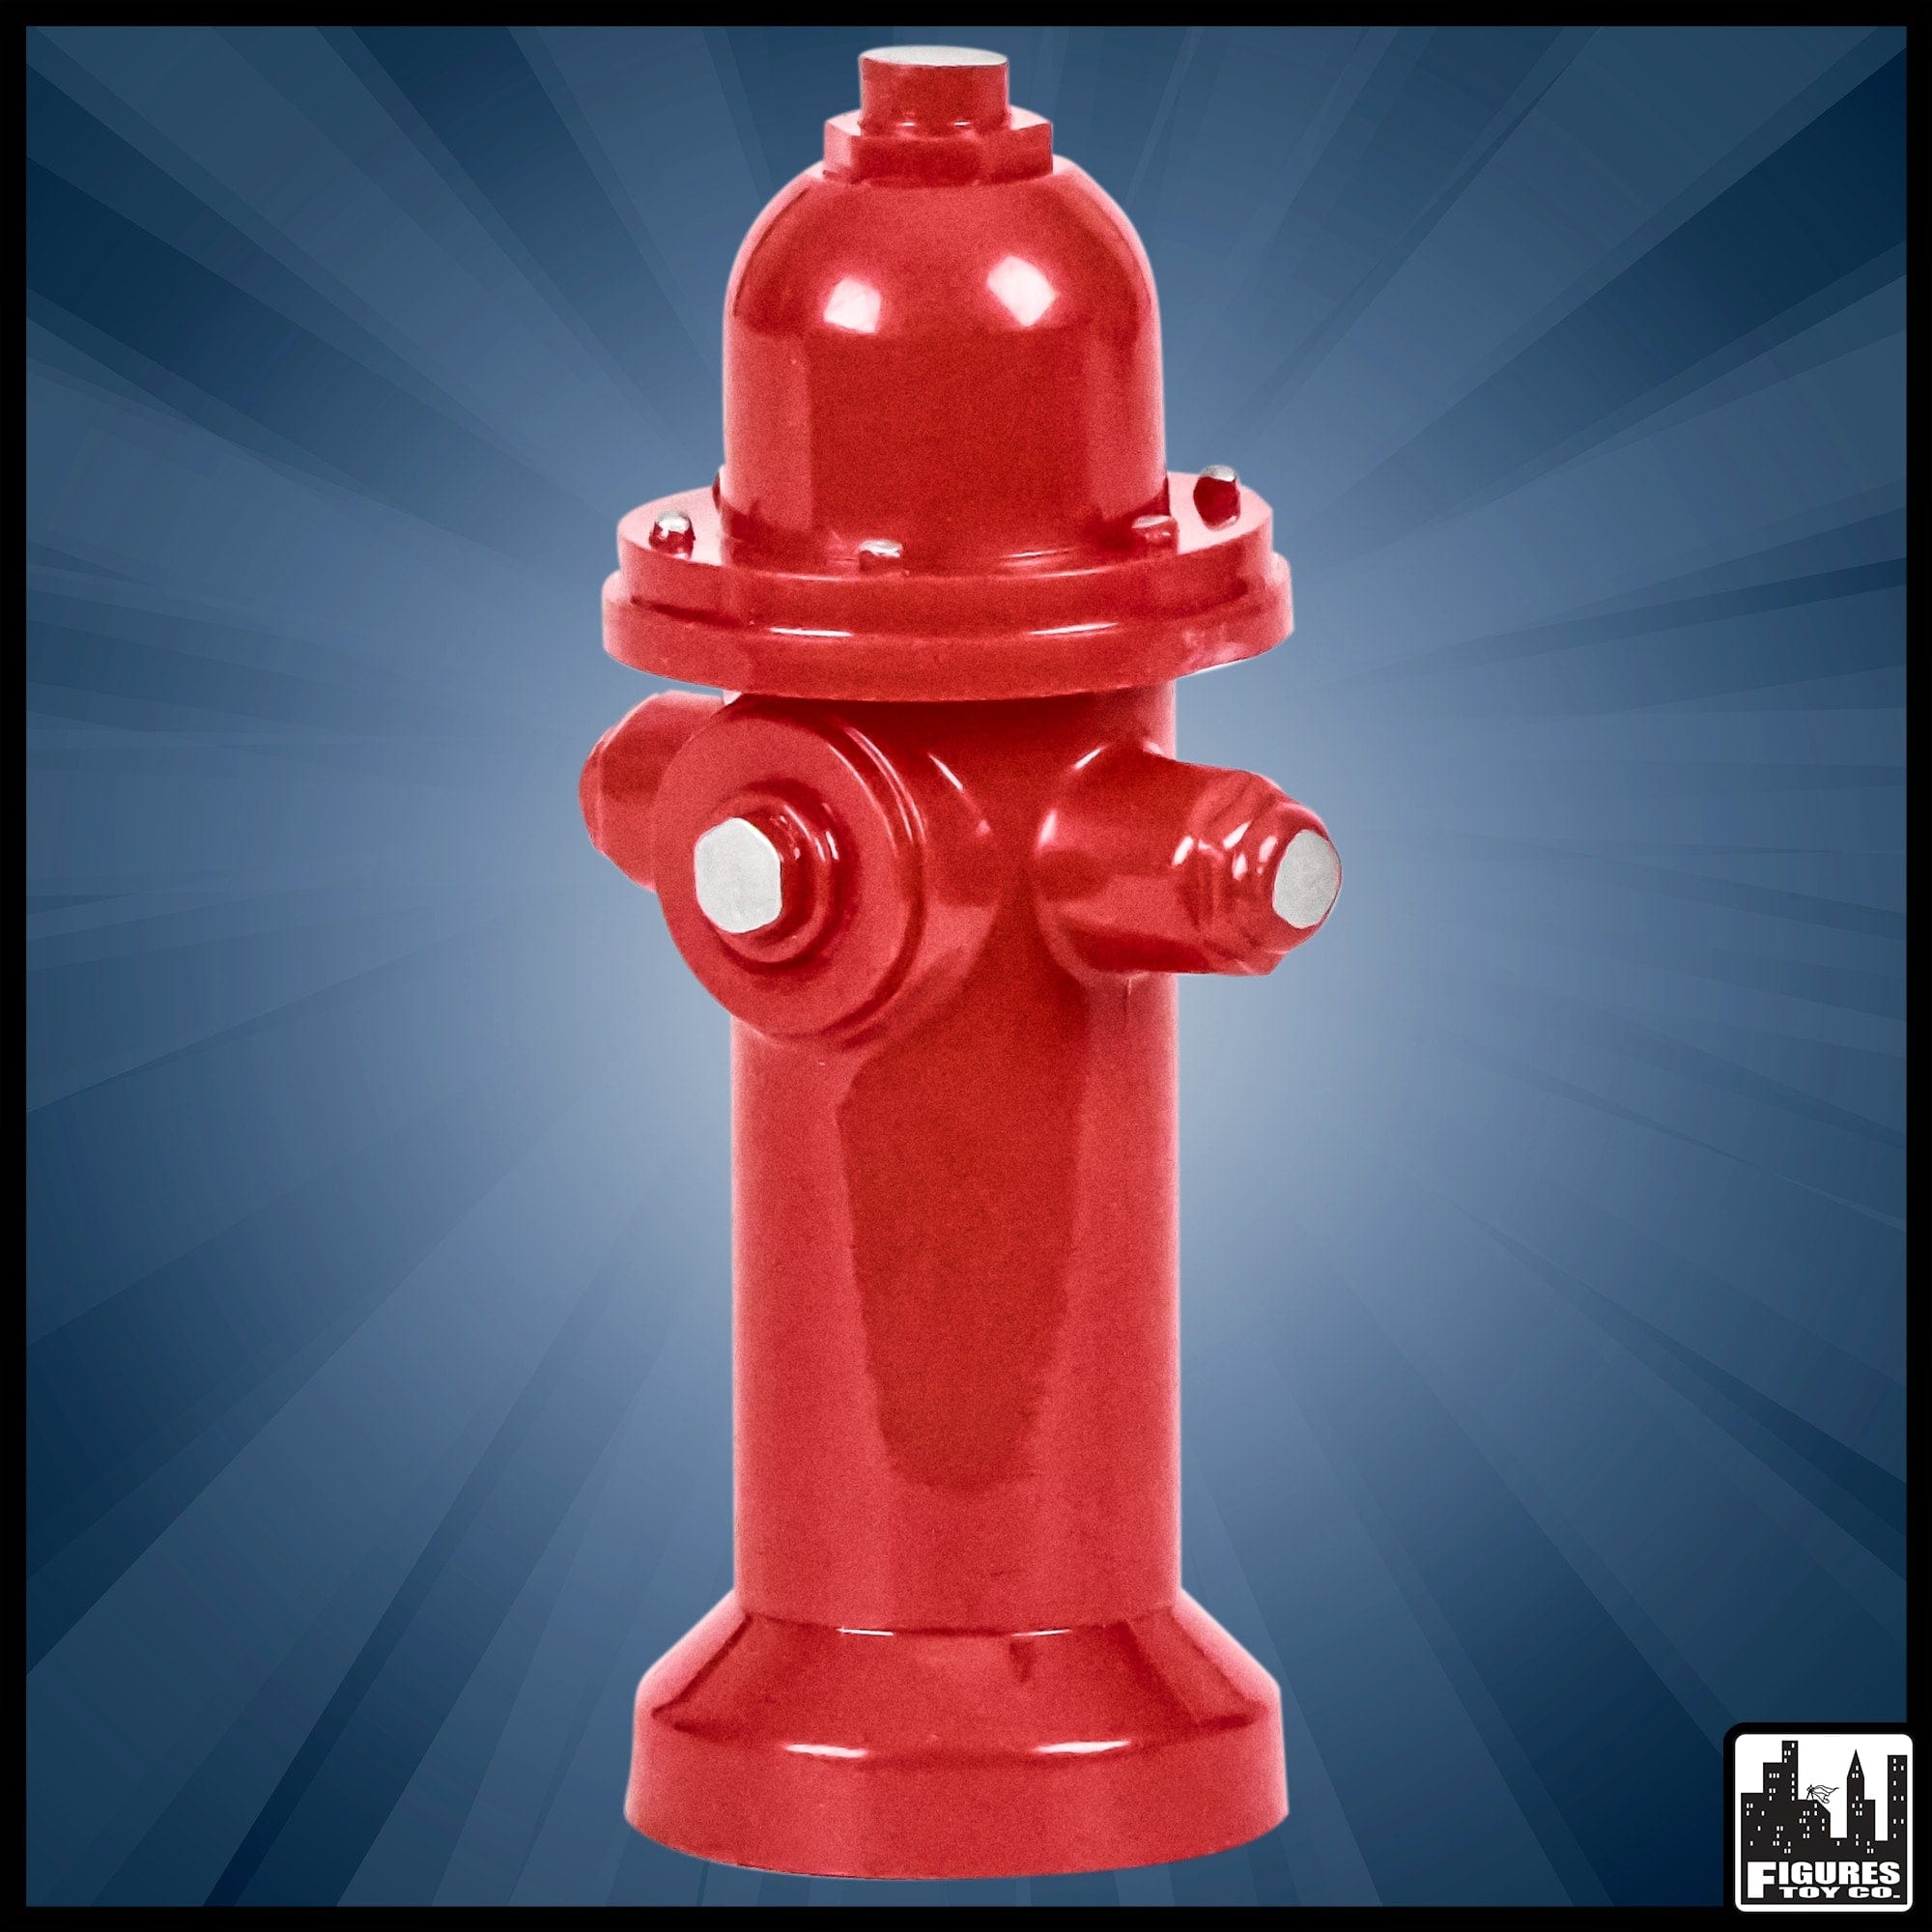 Red Fire Hydrant for WWE Wrestling Action Figures